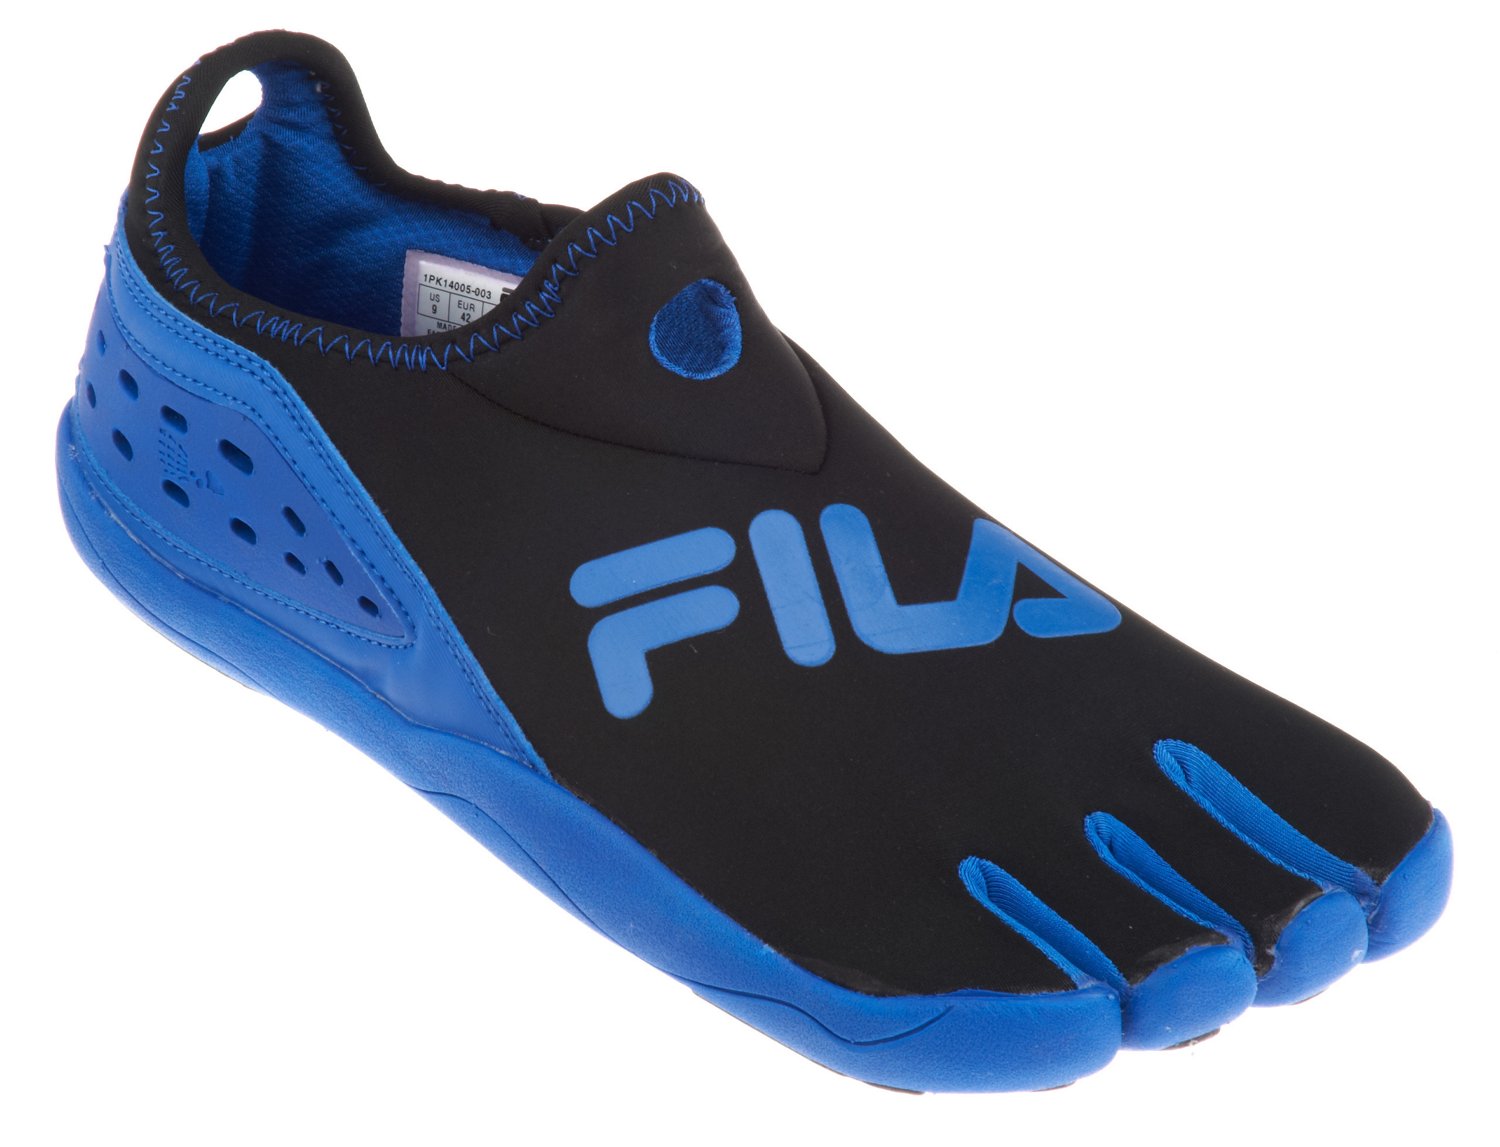 New Kayak shoes for 20.00 Texas Fishing Forum